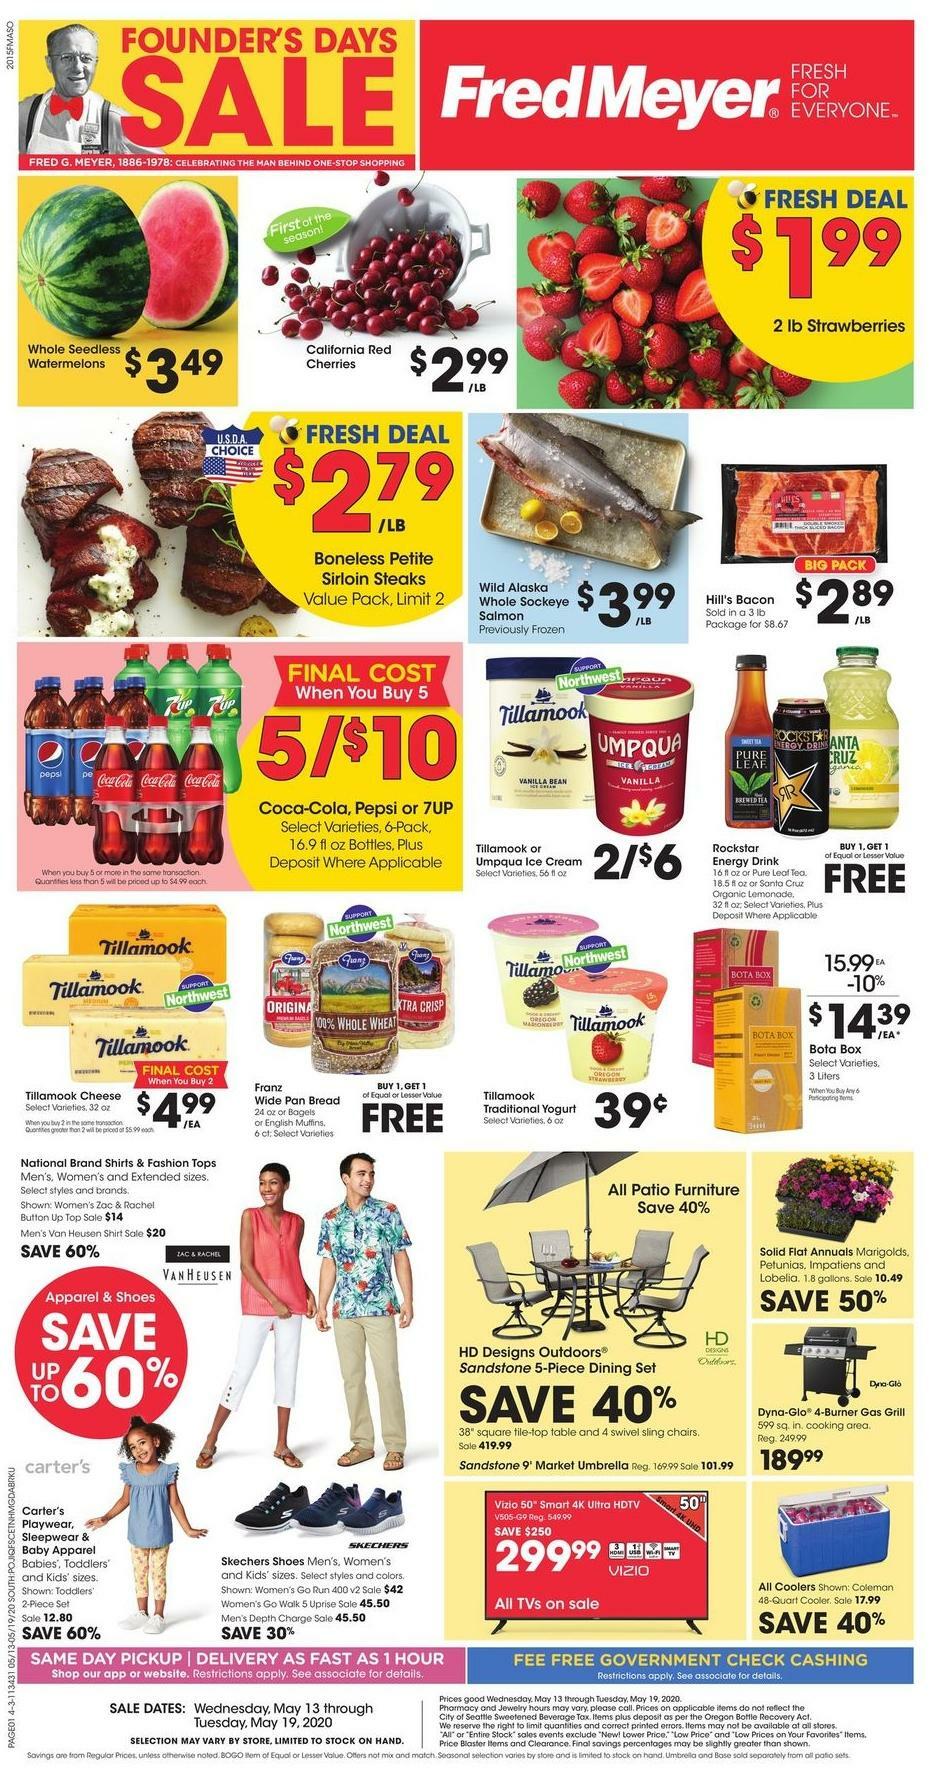 Fred Meyer Founder's Day Sale Weekly Ad & Specials from May 13